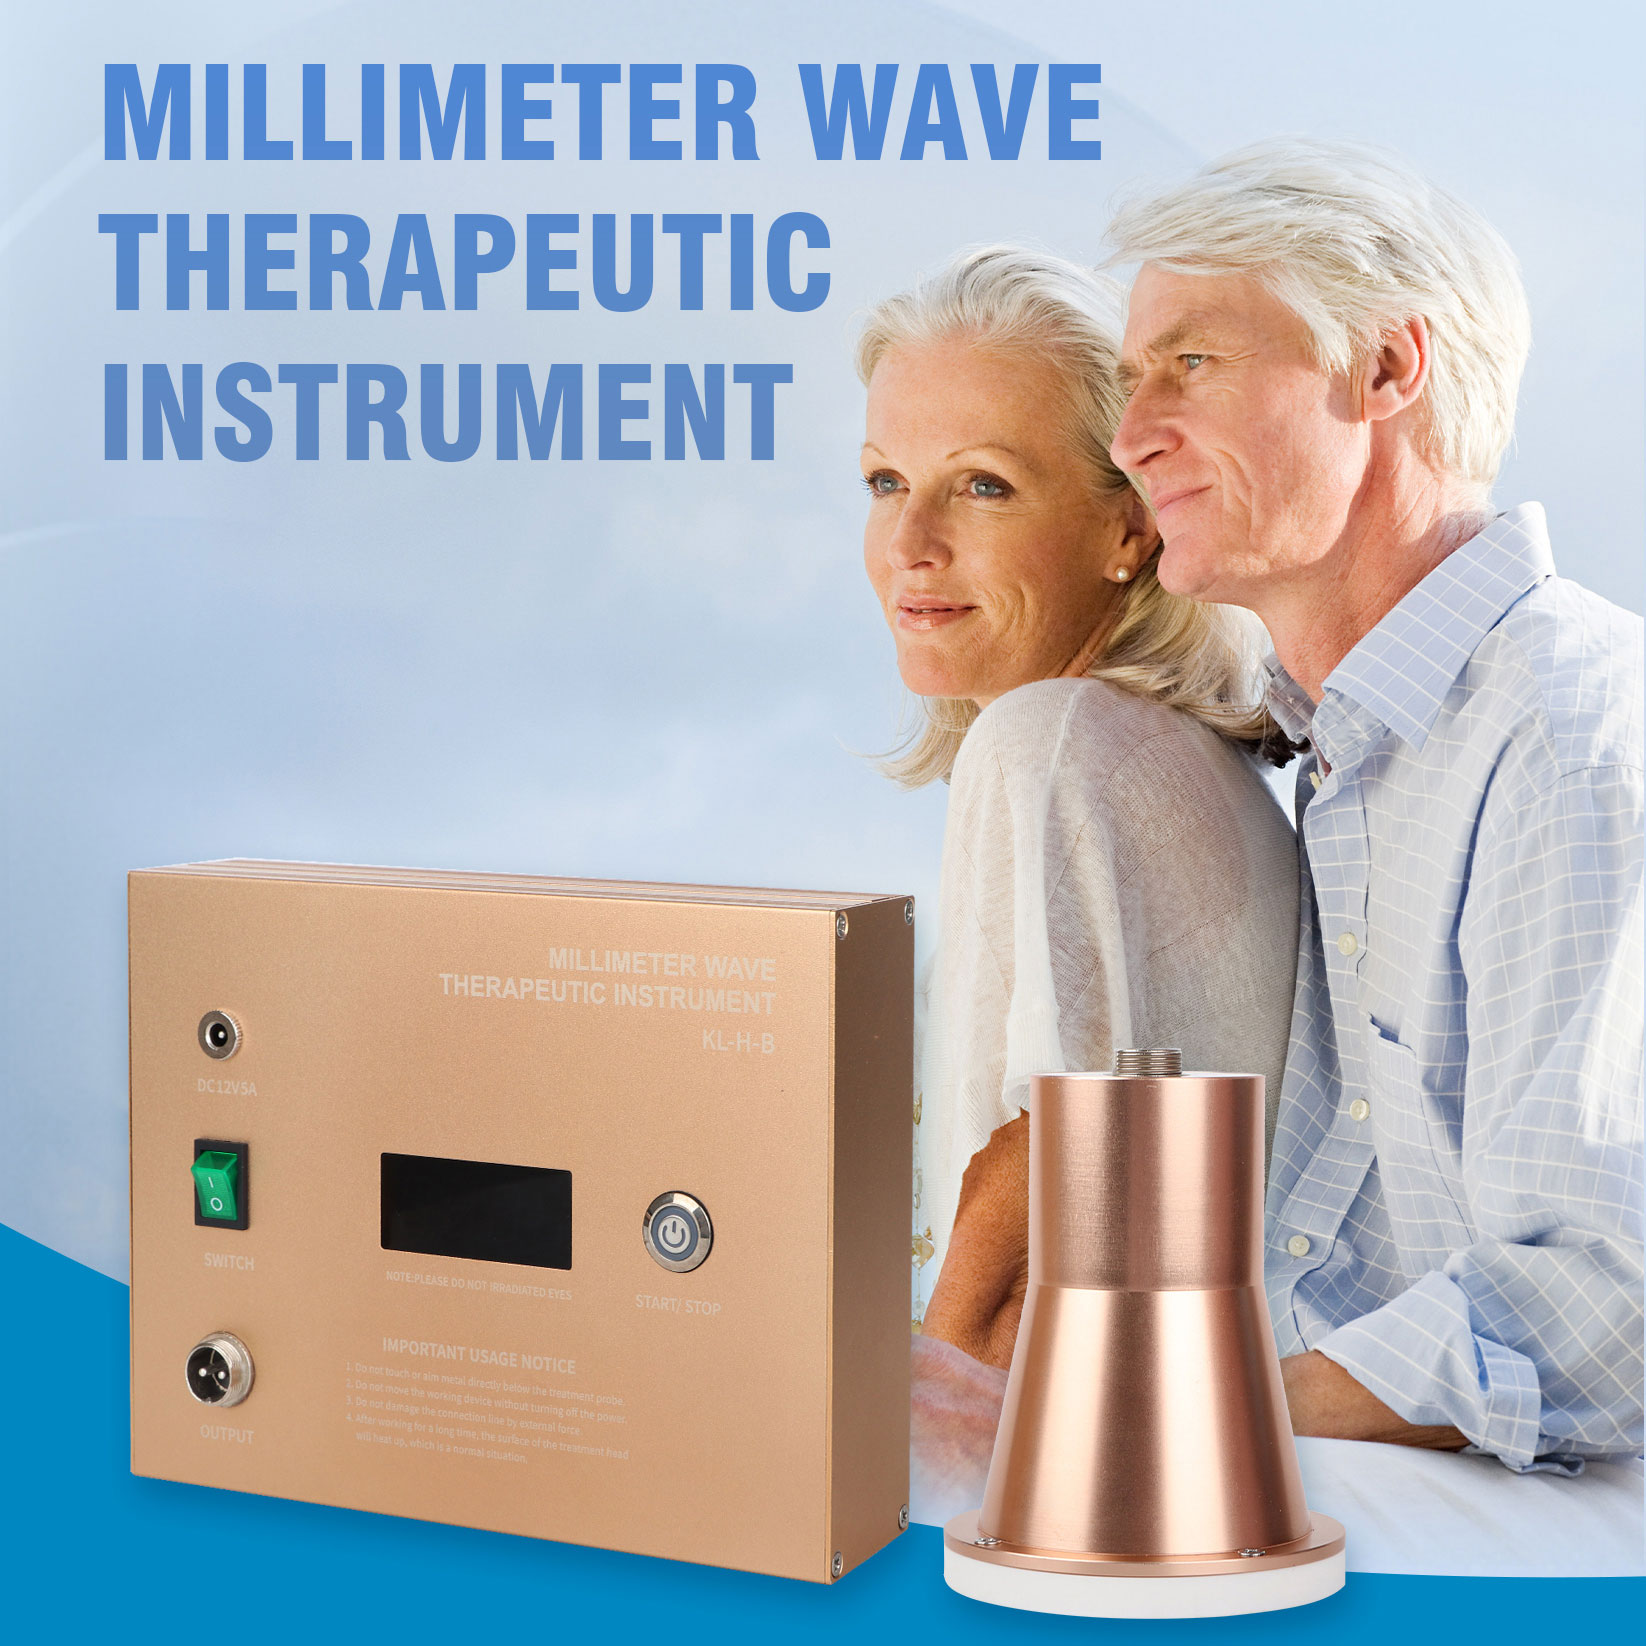 Millimeter Wave Therapy Instrument helps diabetics